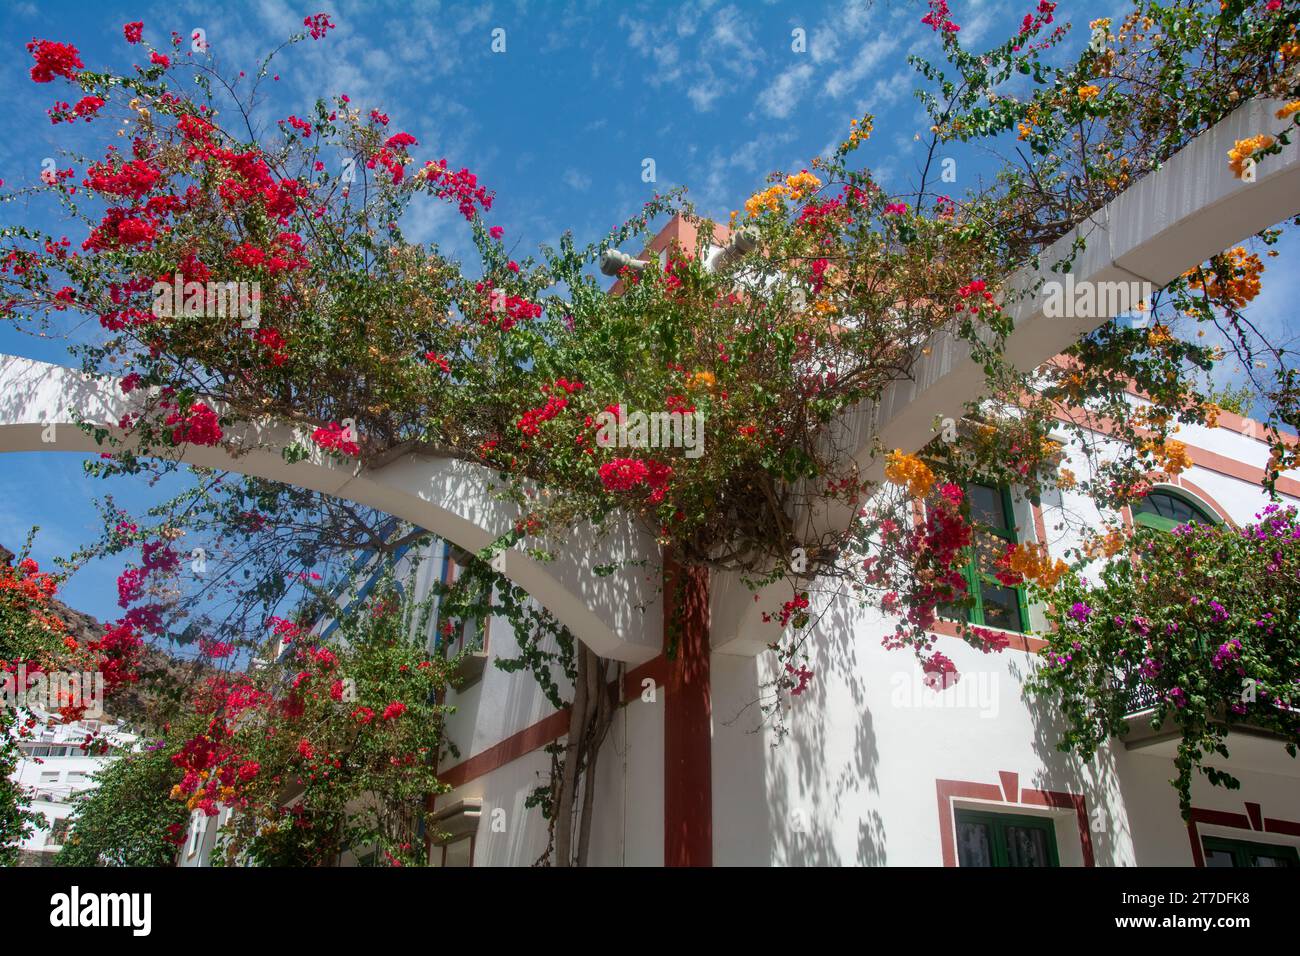 Flowers on the houses in the romantic  fishing  village of Puerto de Mogán on the Canary Island of Gran Canaria in Spain Stock Photo